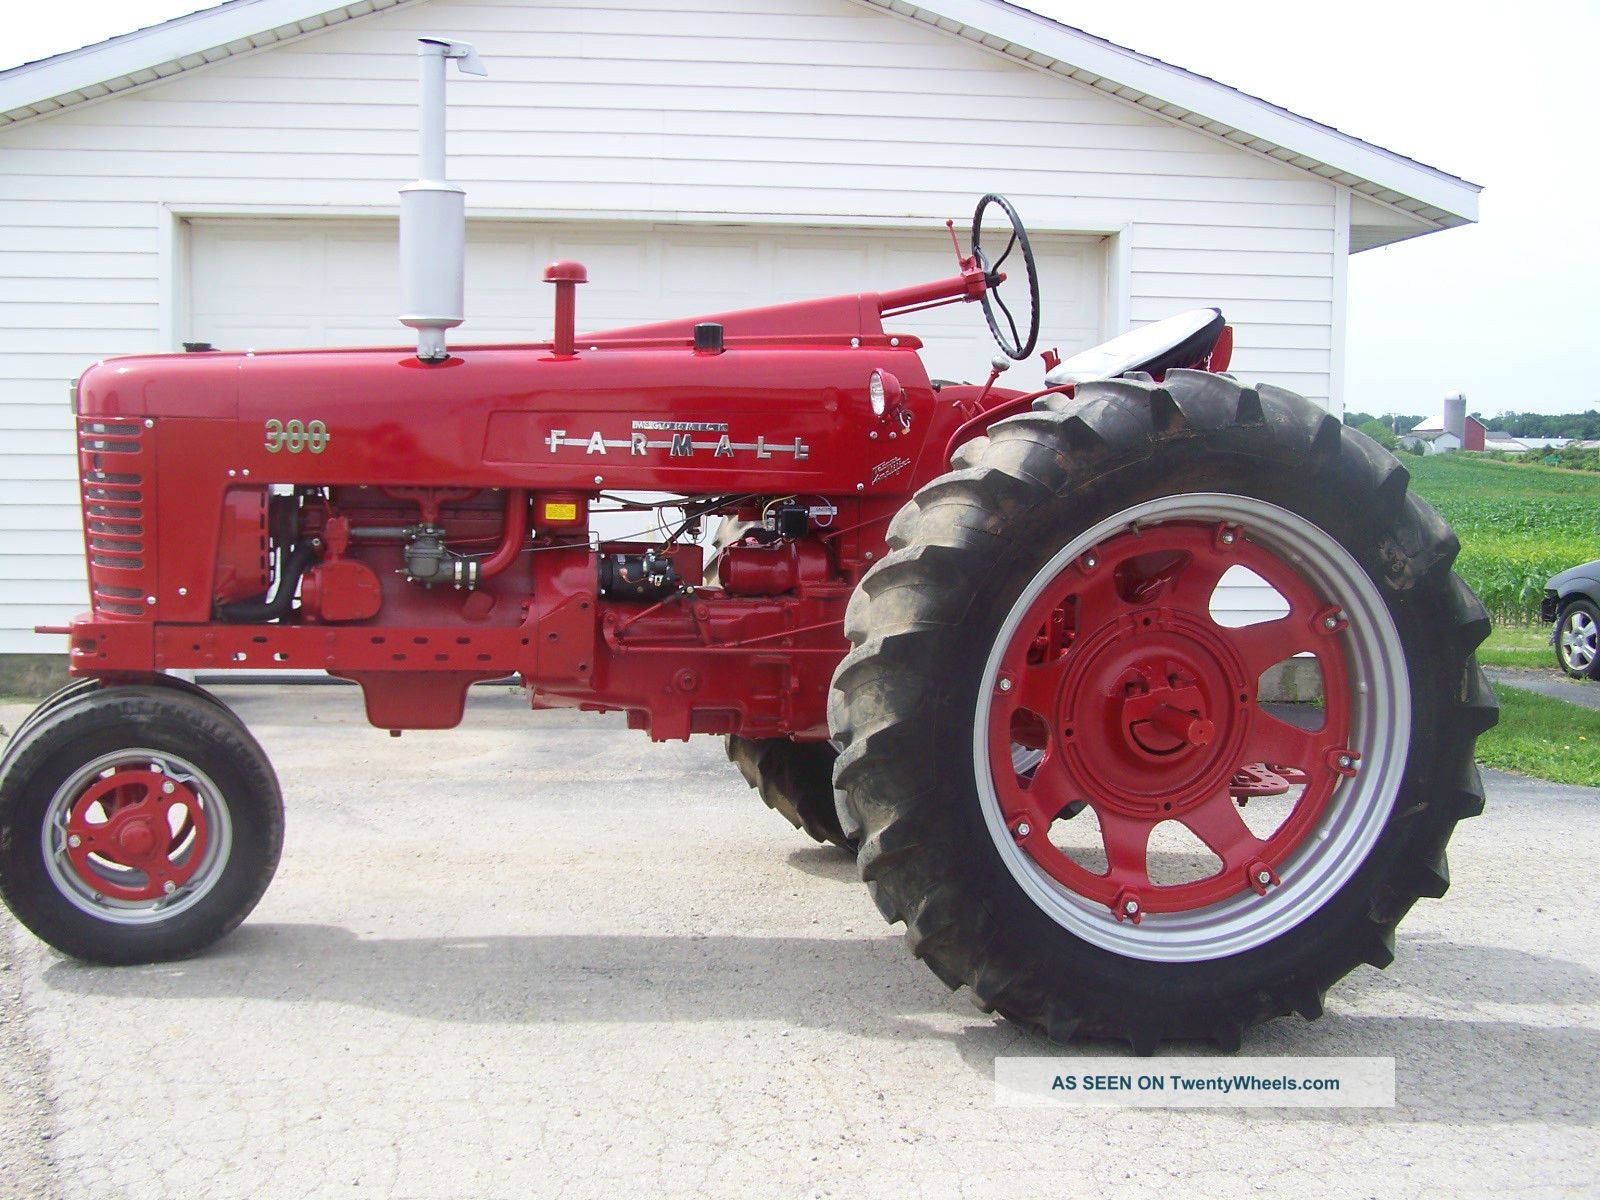 Farmall 300 Tractor Restored For Display Or Parade Antique & Vintage ...